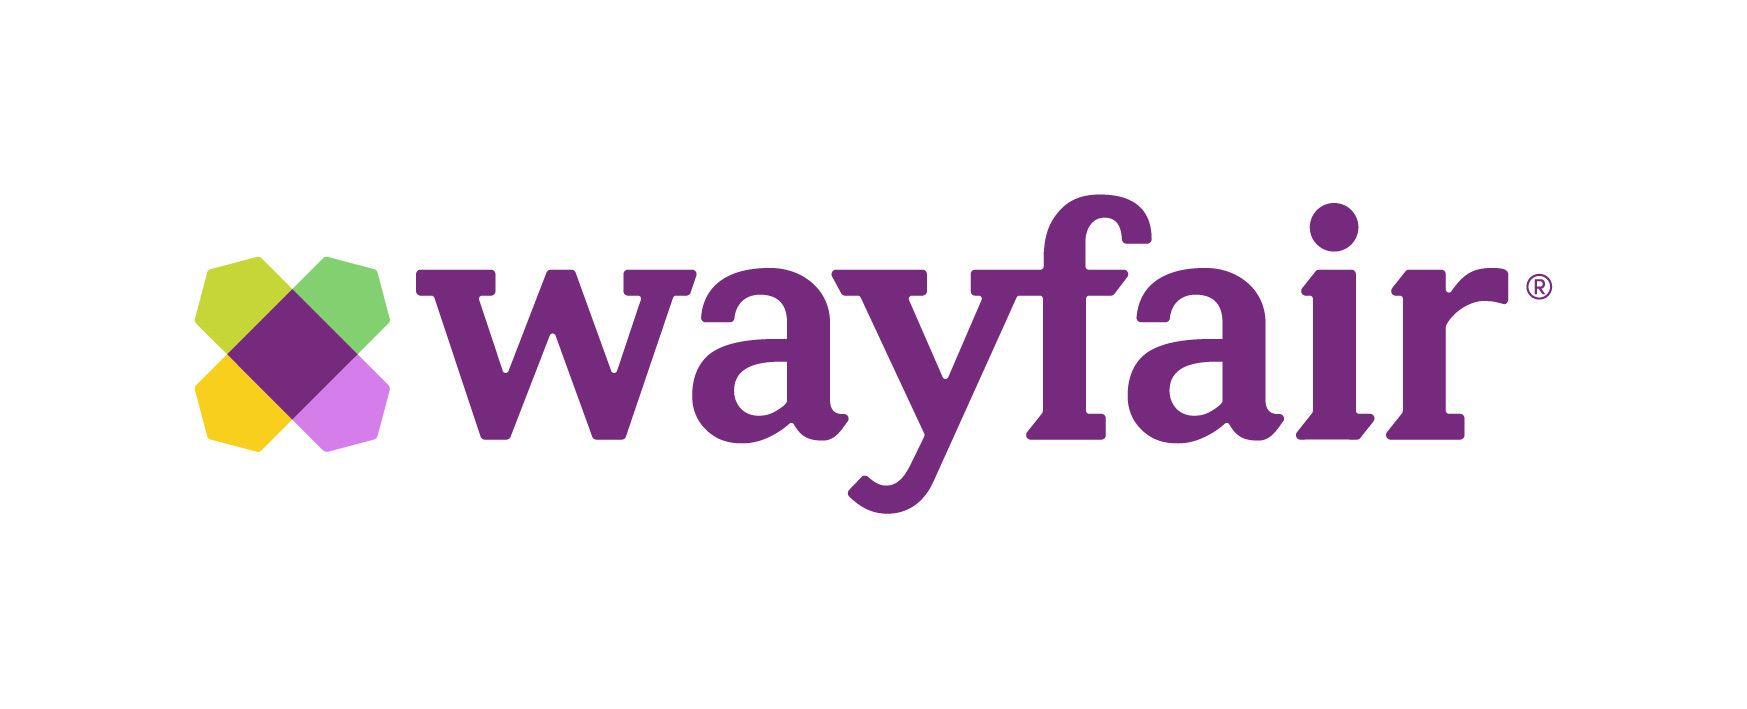 Chewy.com Logo - The Fly Blog | Analyst Sees Wayfair As Takeover Target After Chewy ...